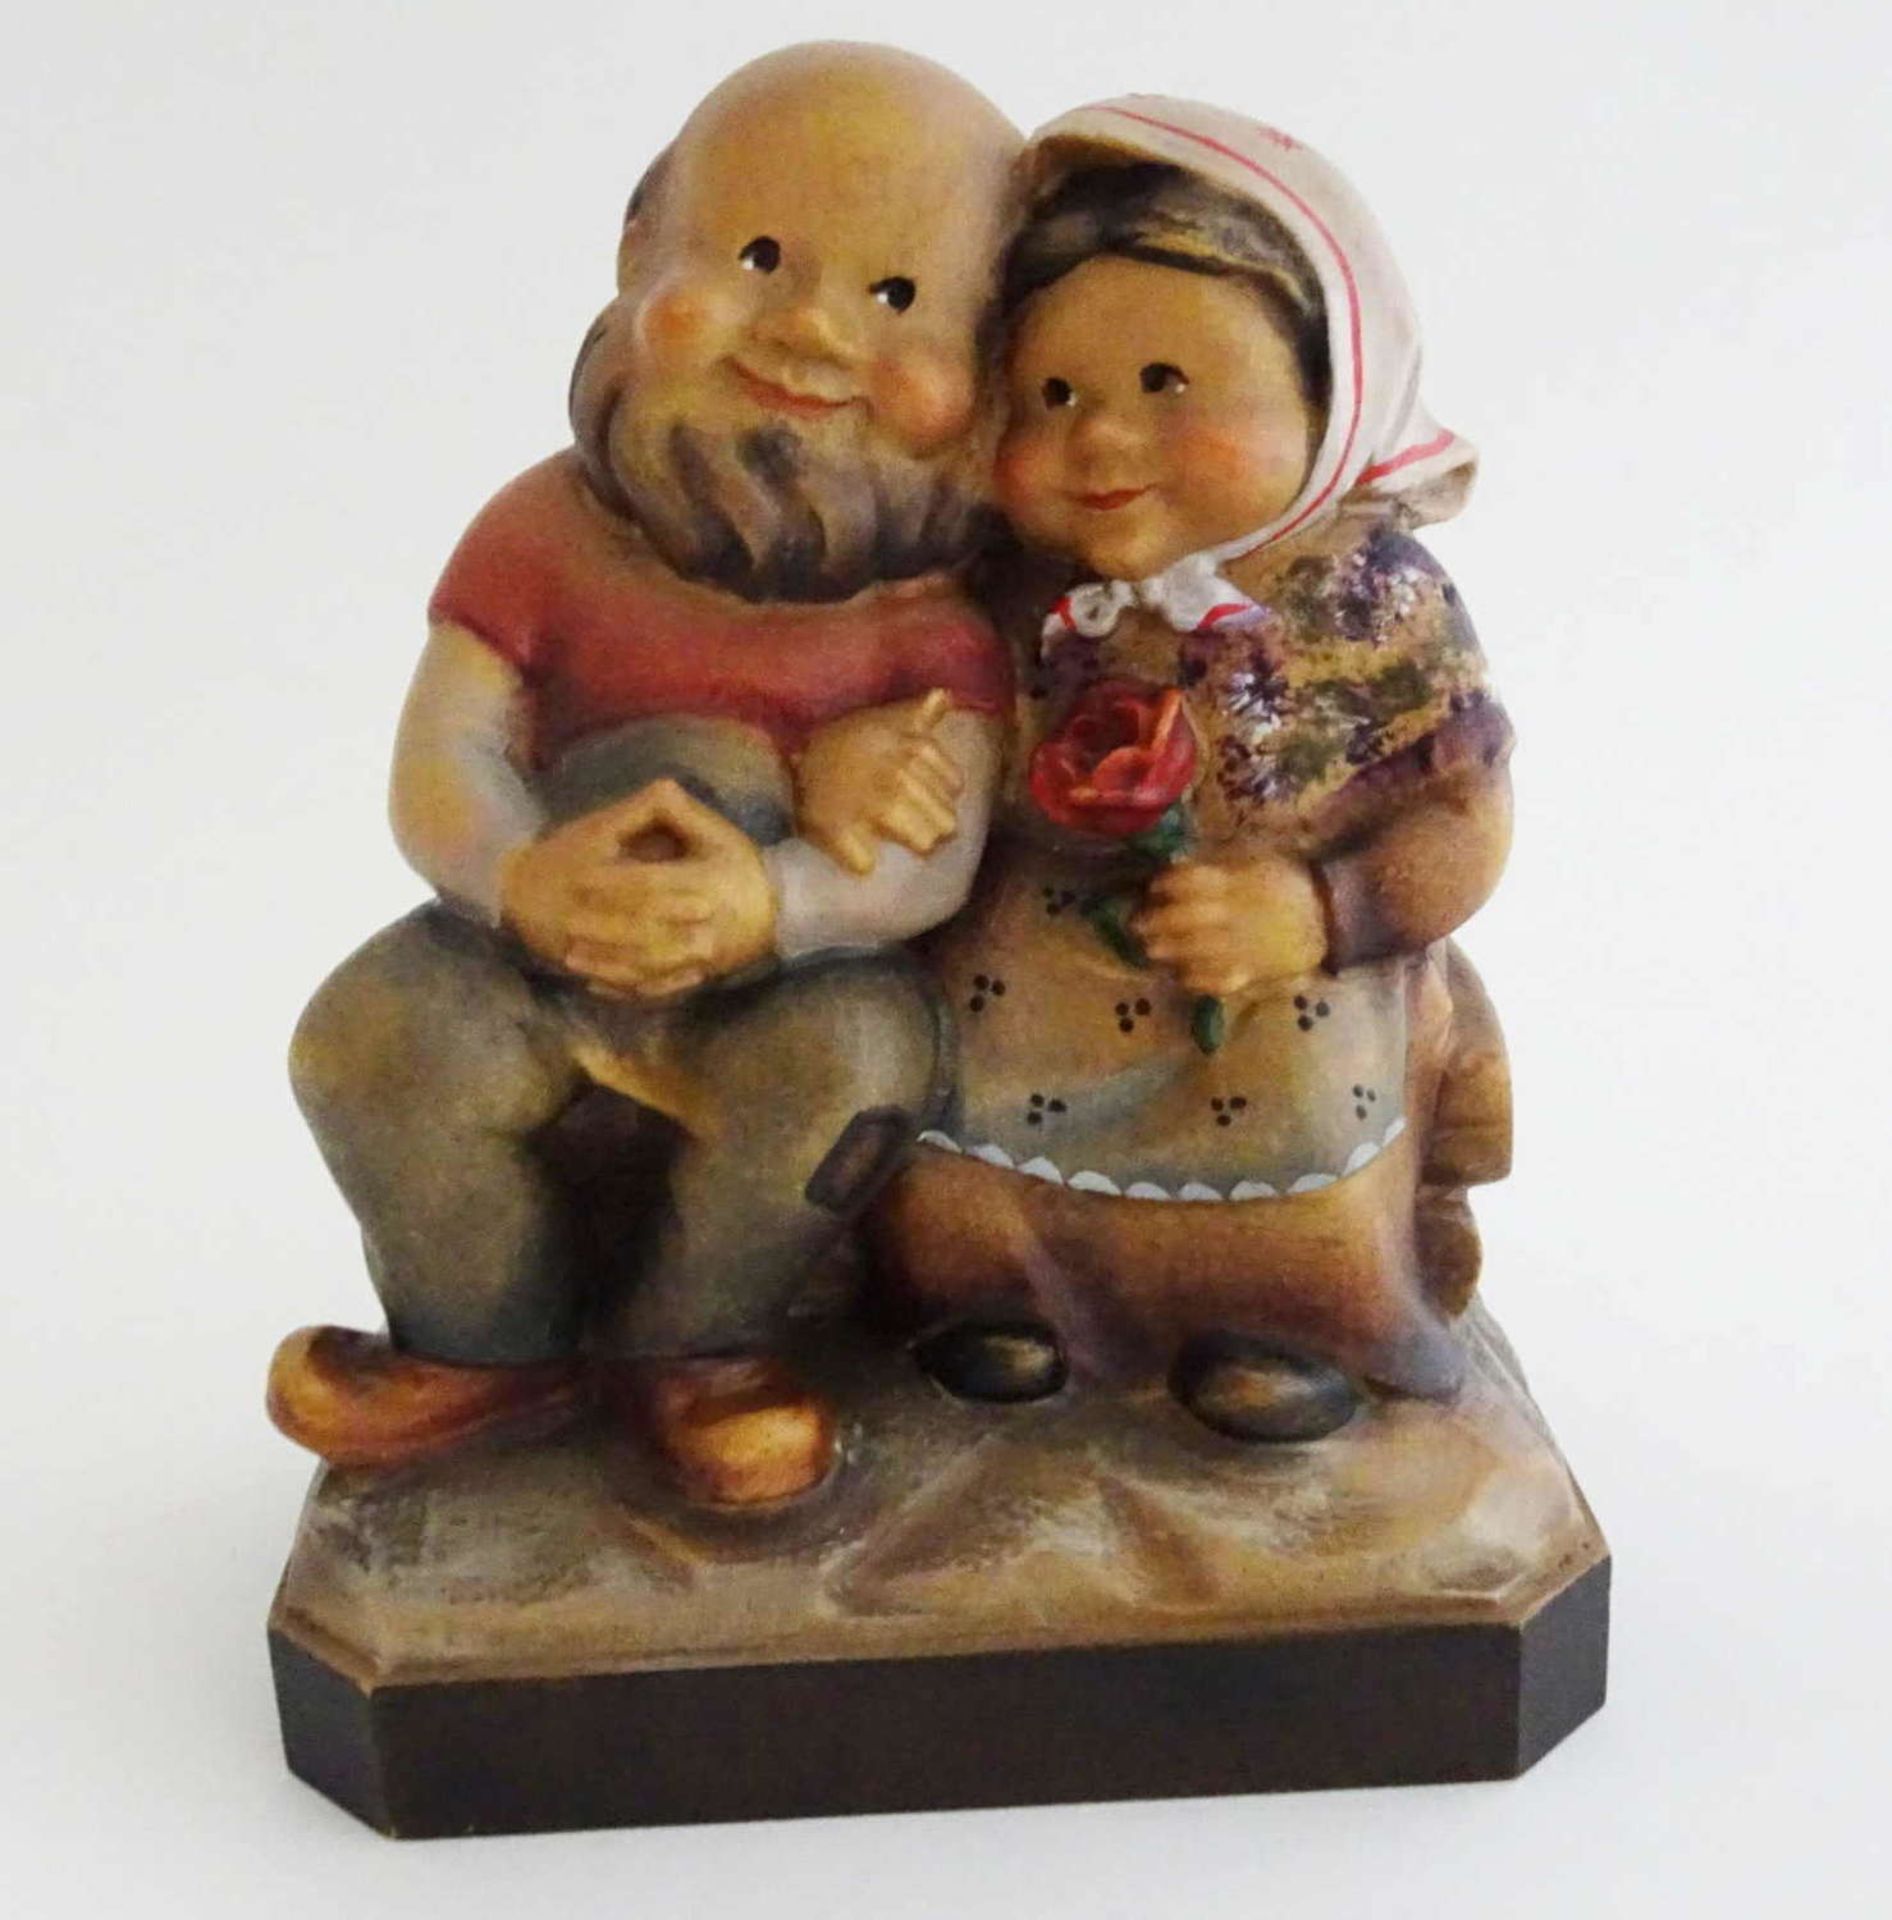 Toni Baur, wood carver from Oberammergau, old couple, sitting on a bench. Length about 10.5 cm,